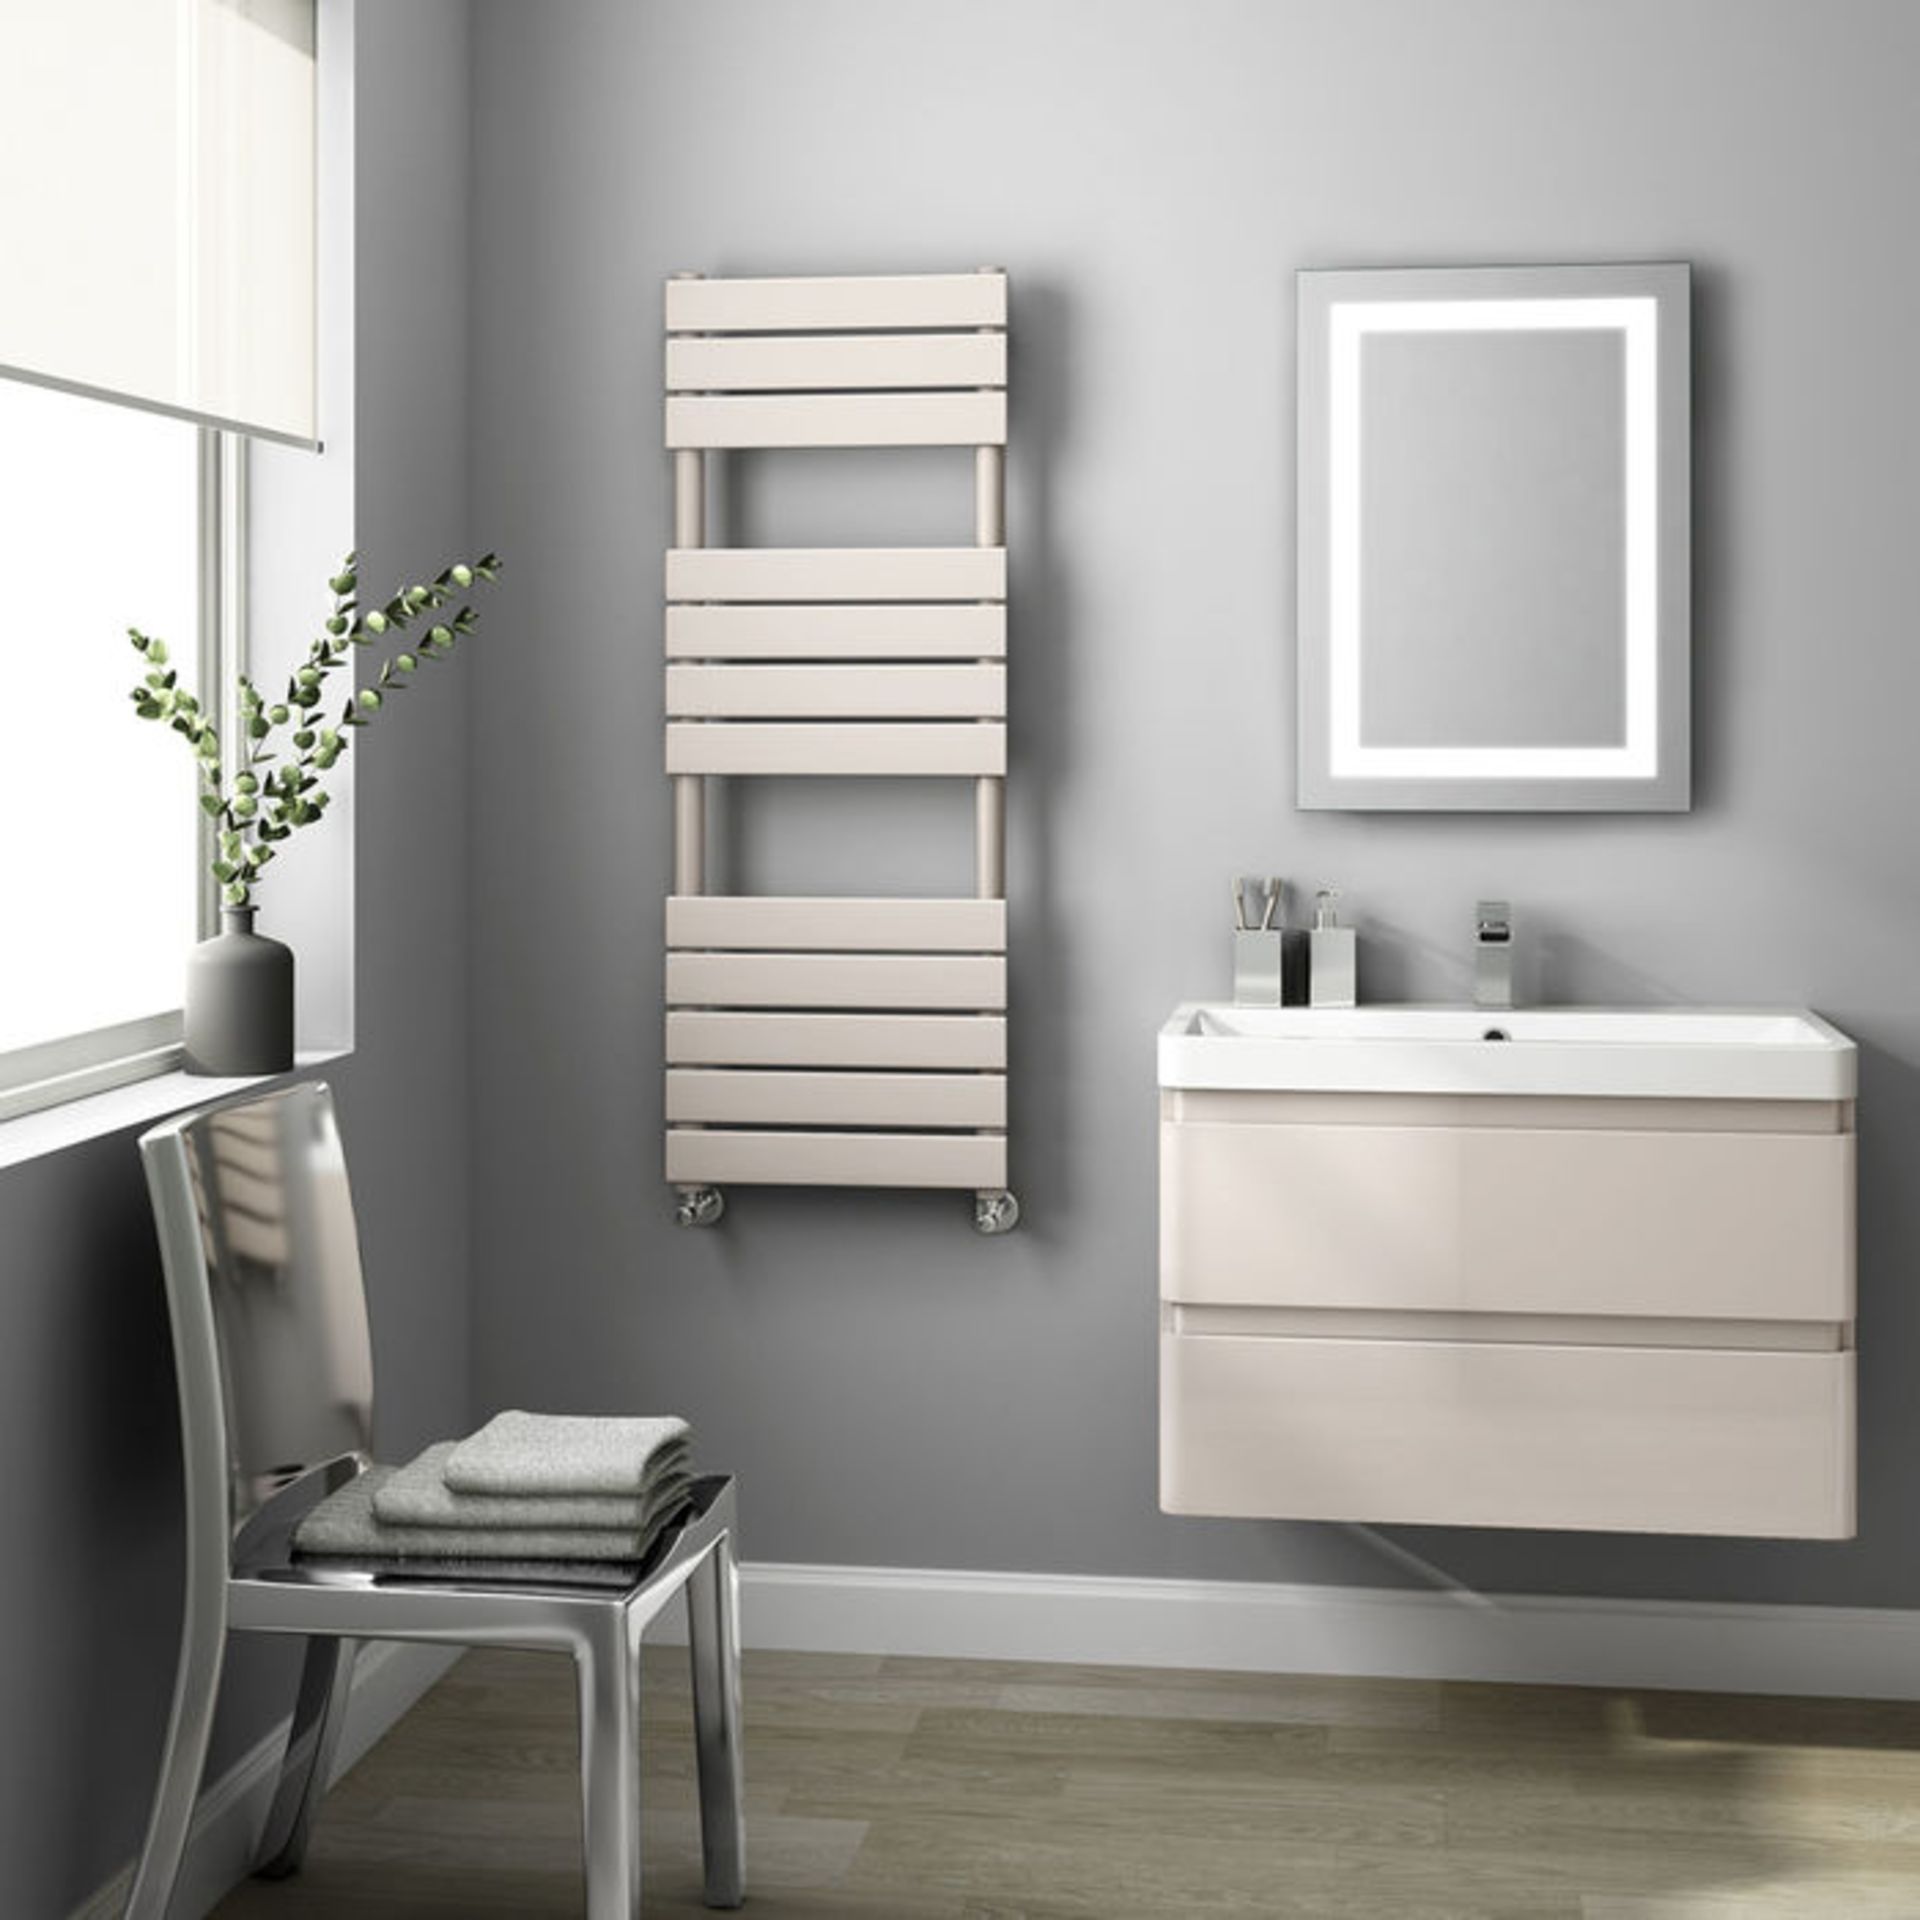 (W12) 1200x450mm Latte Flat Panel Ladder Towel Radiator. Made from high quality low carbon steel - Image 2 of 3